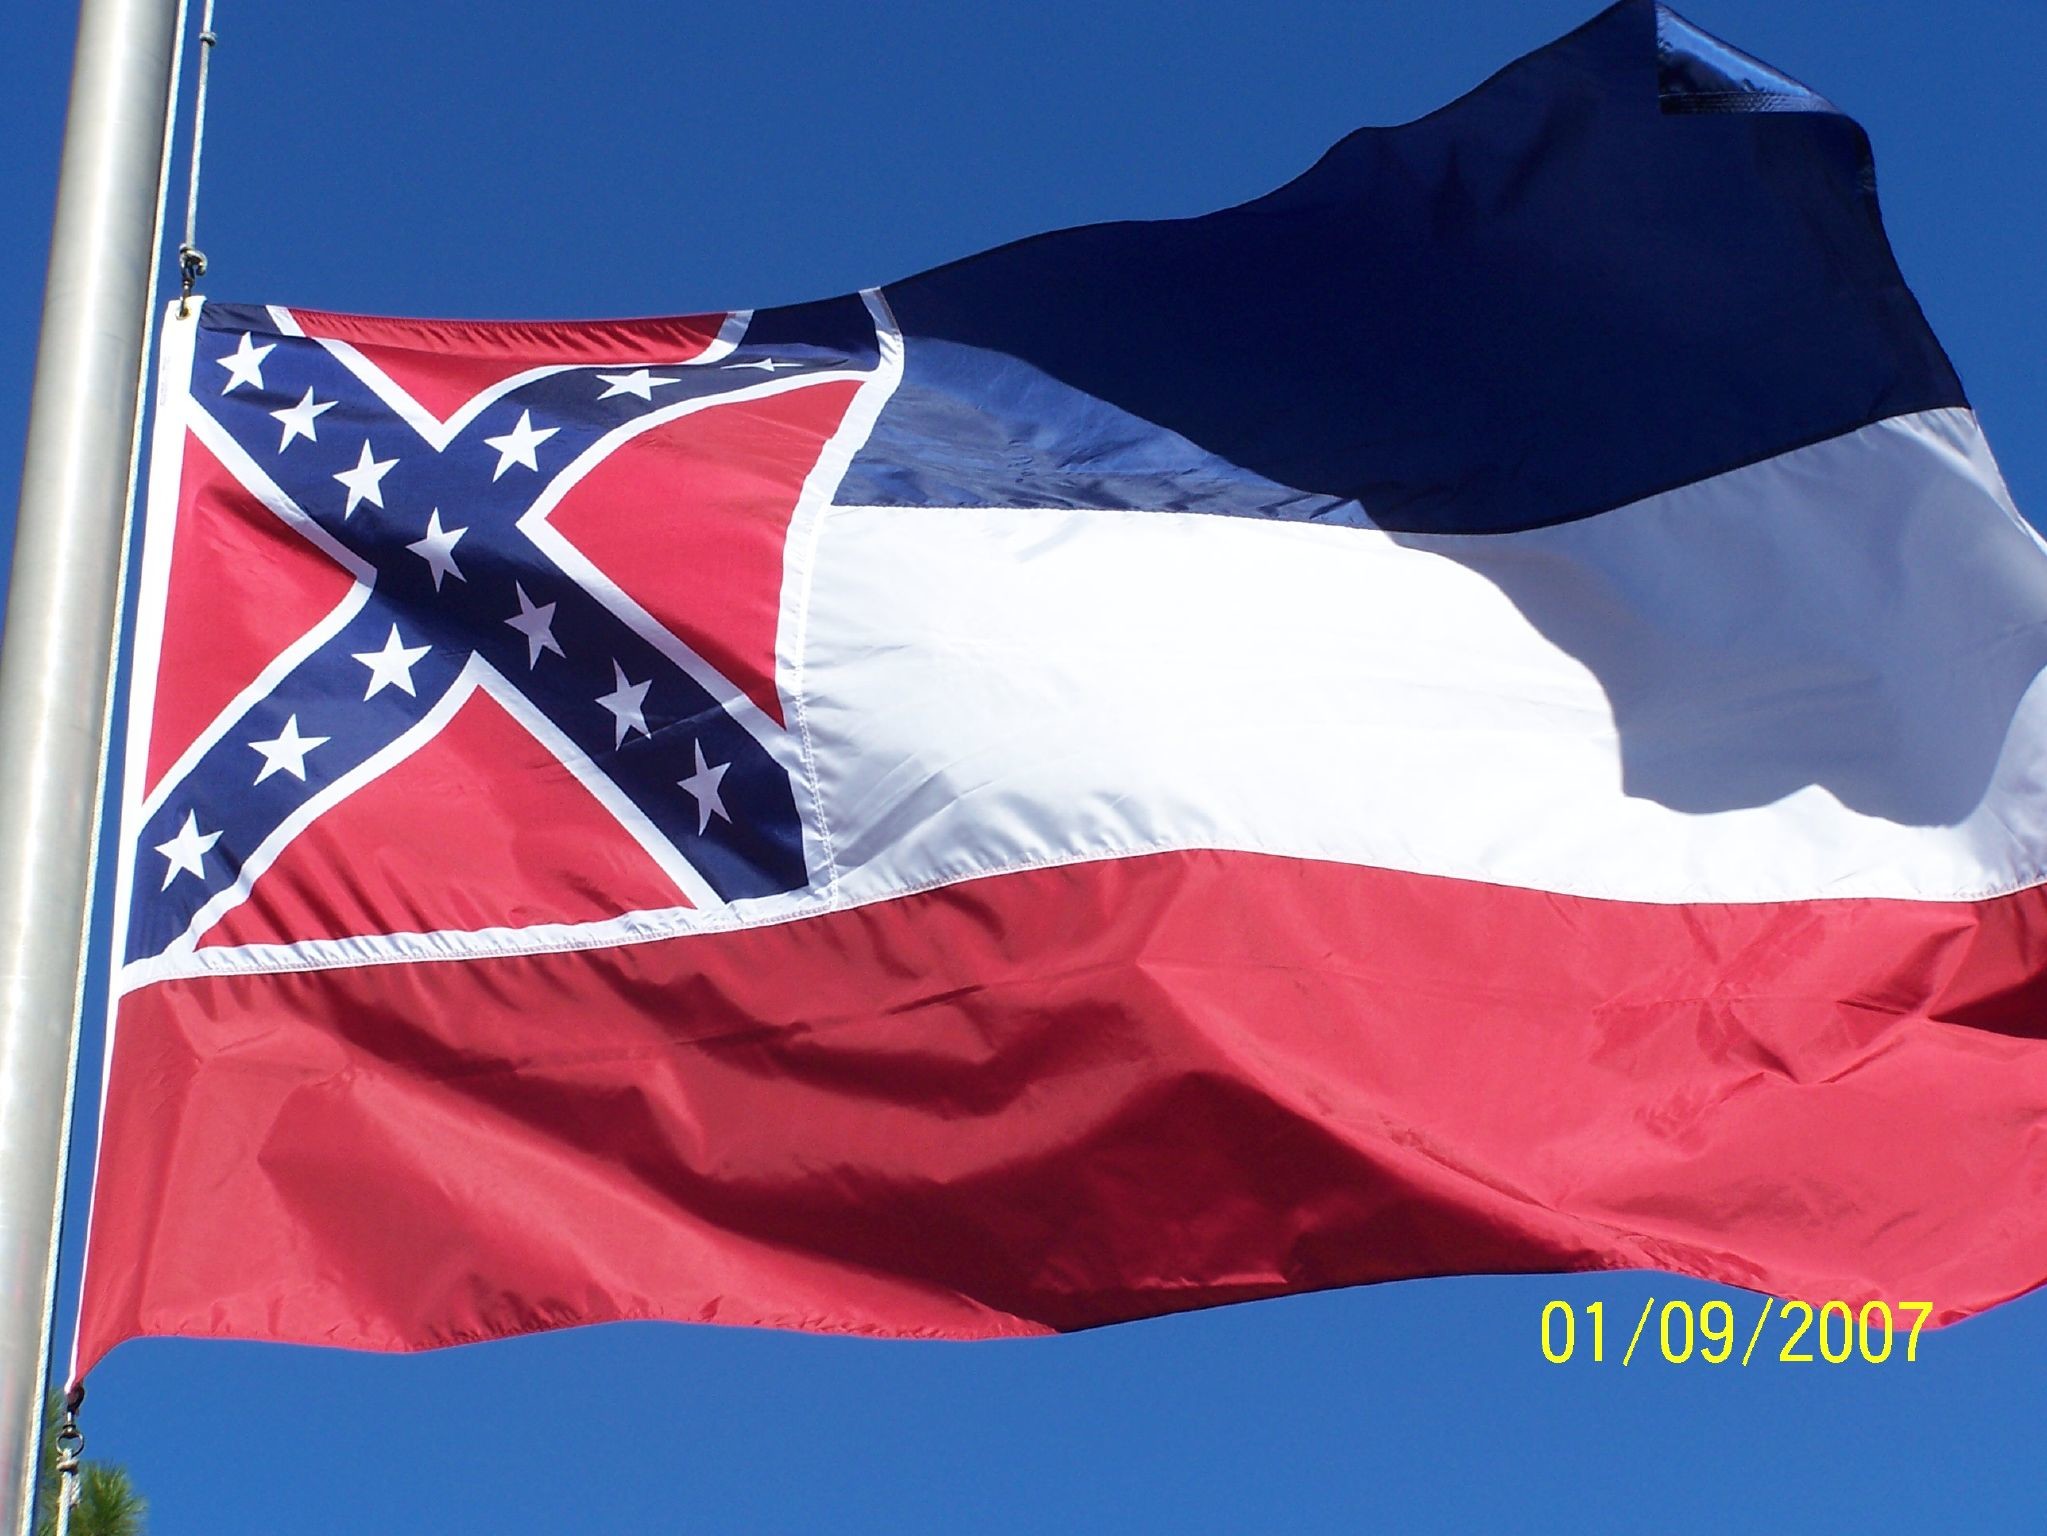 Pin Southern Pride Rebel Flag Wallpaper For Iphone App Info on.